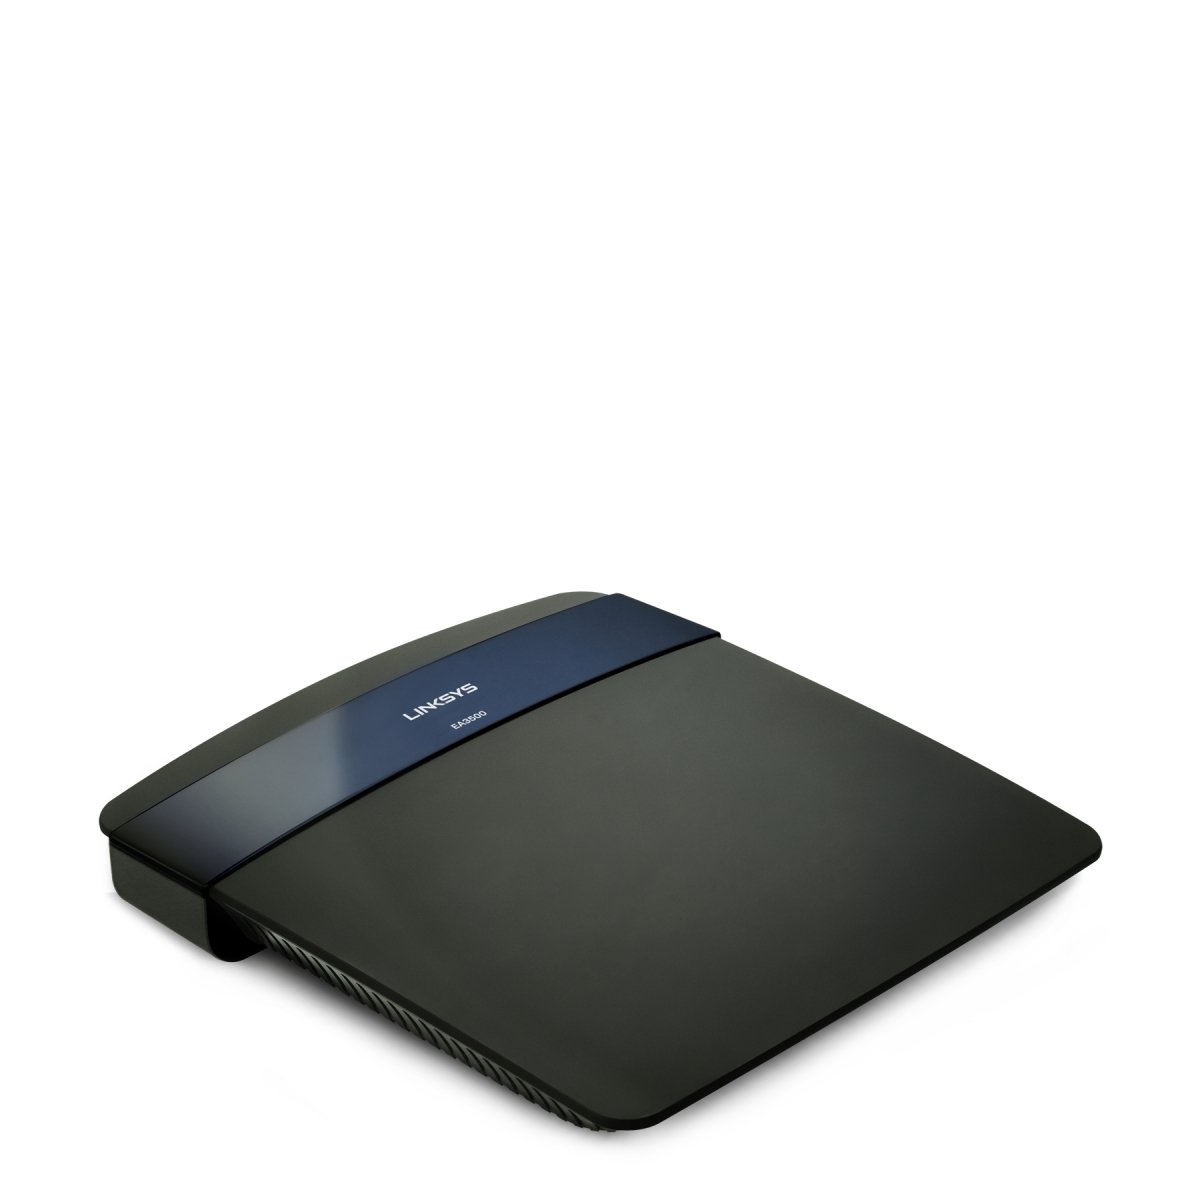 Linksys EA3500 - Dual-Band N750 Router with Gigabit and USB (Renewed)